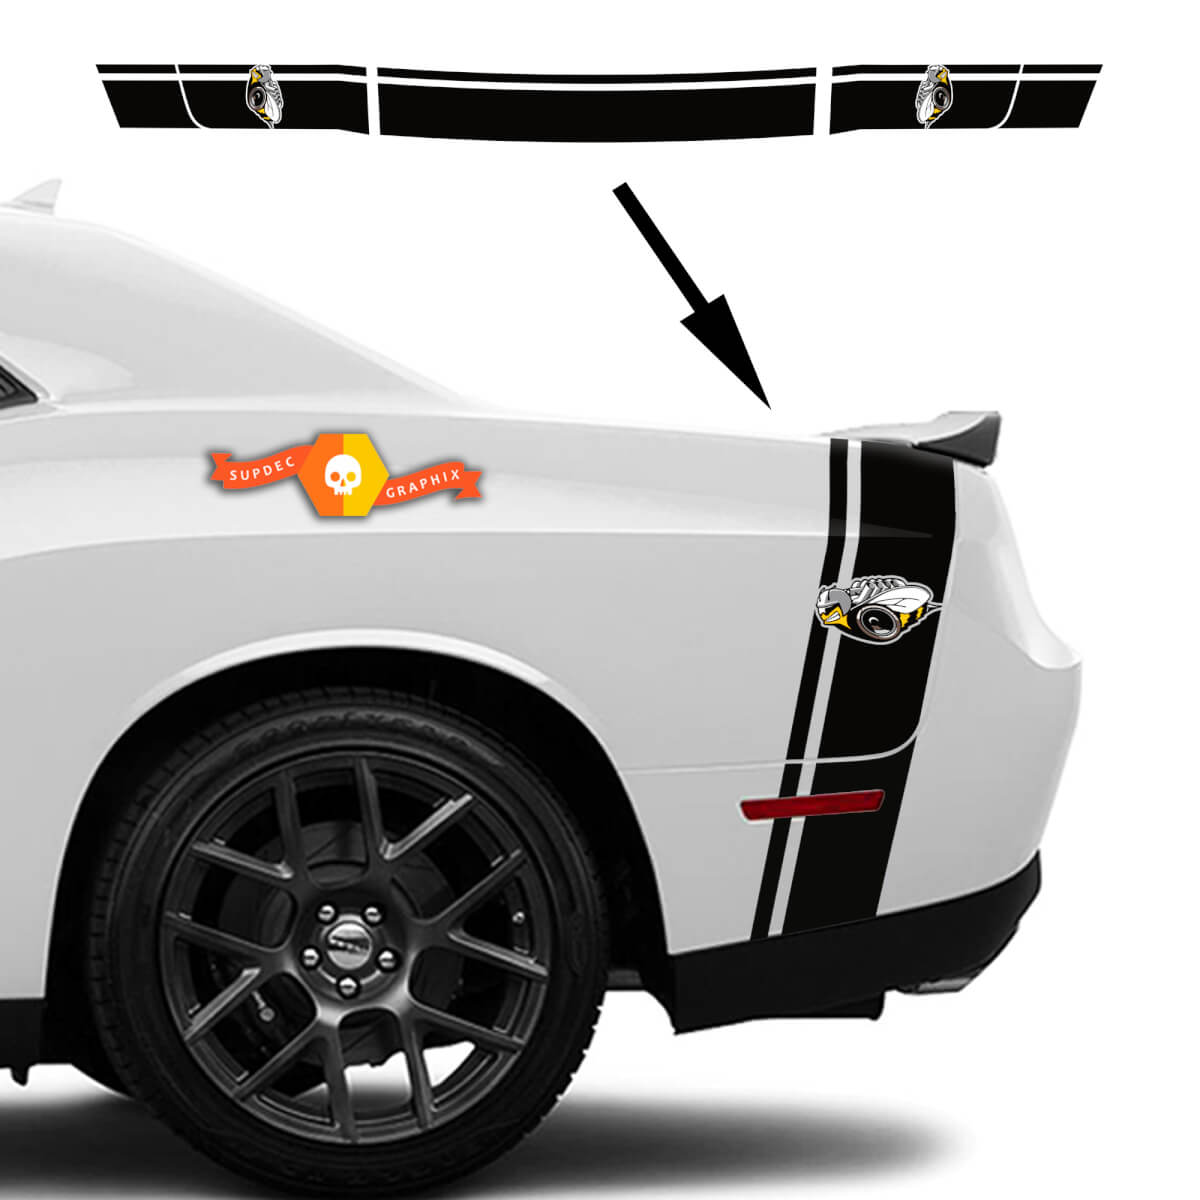 New Kit Dodge Challenger or Charger Drag Bee RUMBLE-BEE Tail Bed Rear Stripe Decal kit trunk